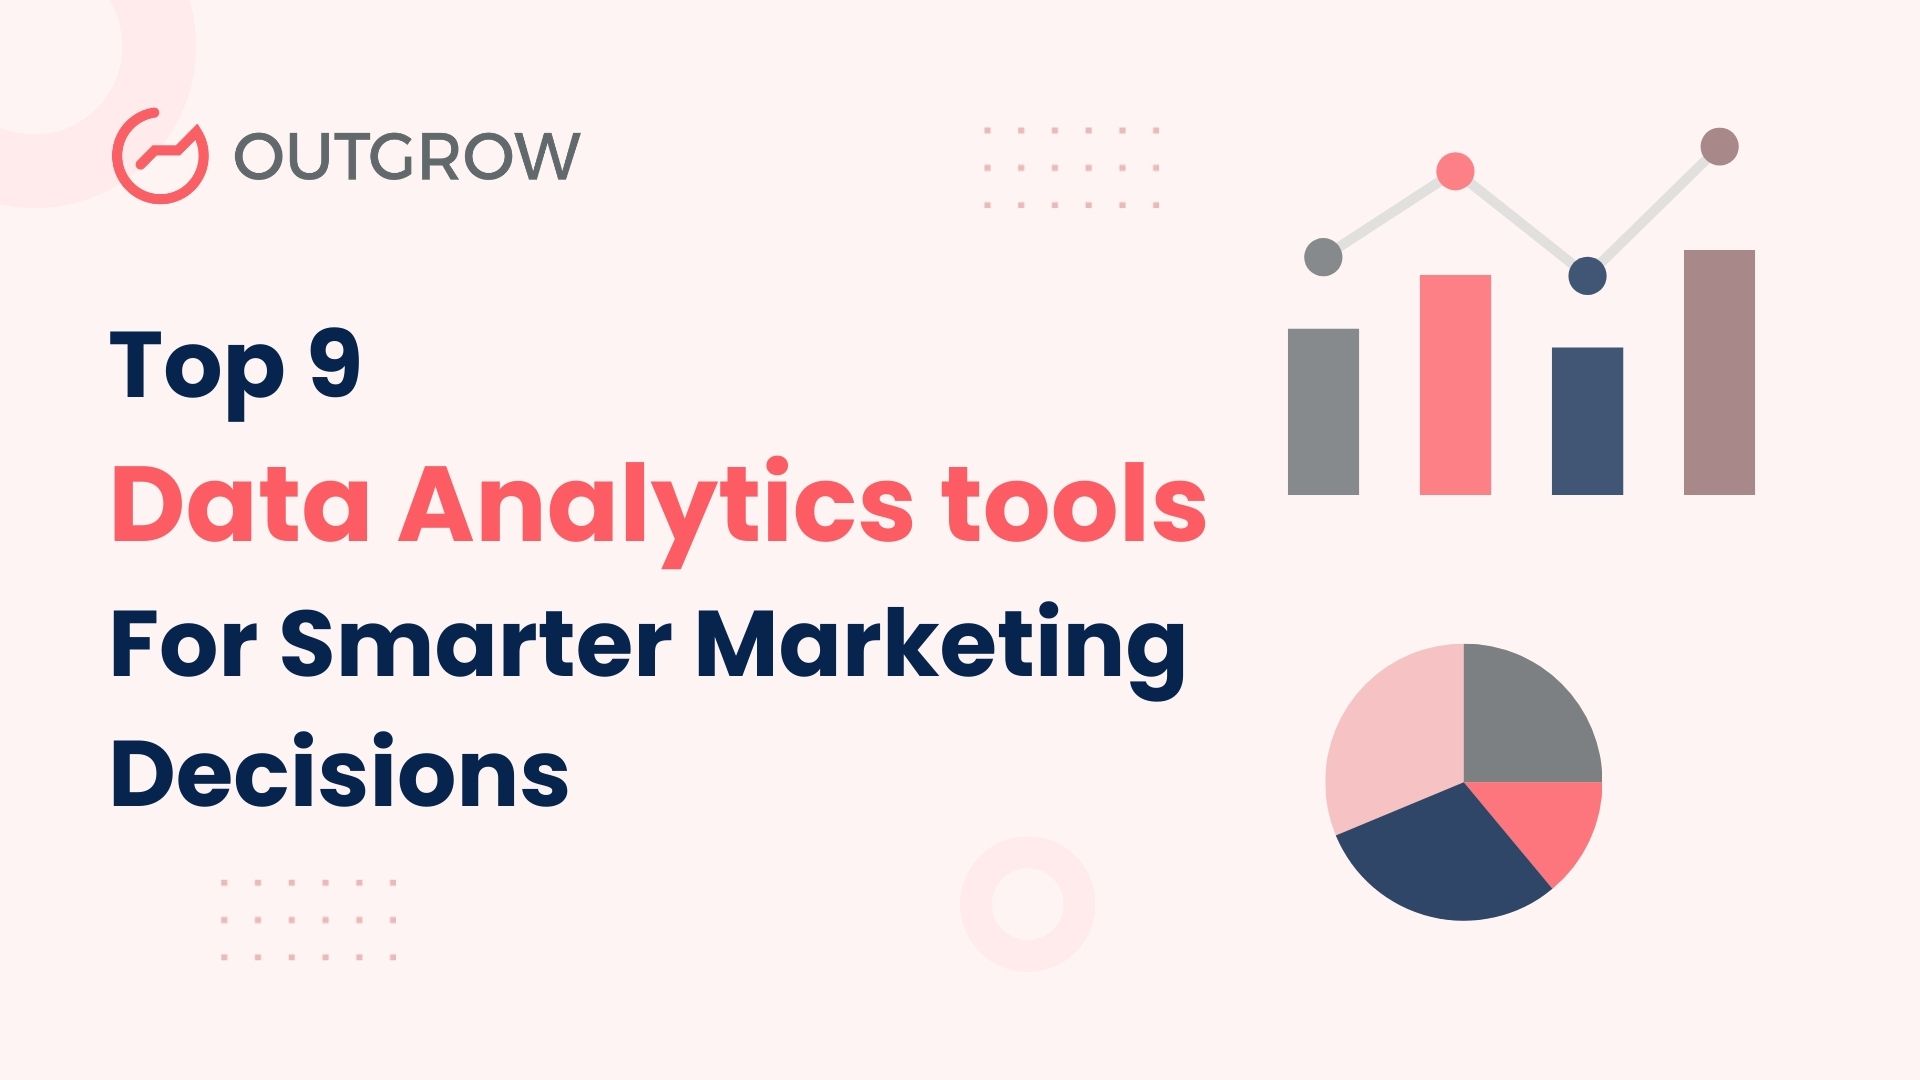 Top 9 Data Analytics Tools for Smarter Marketing Decisions